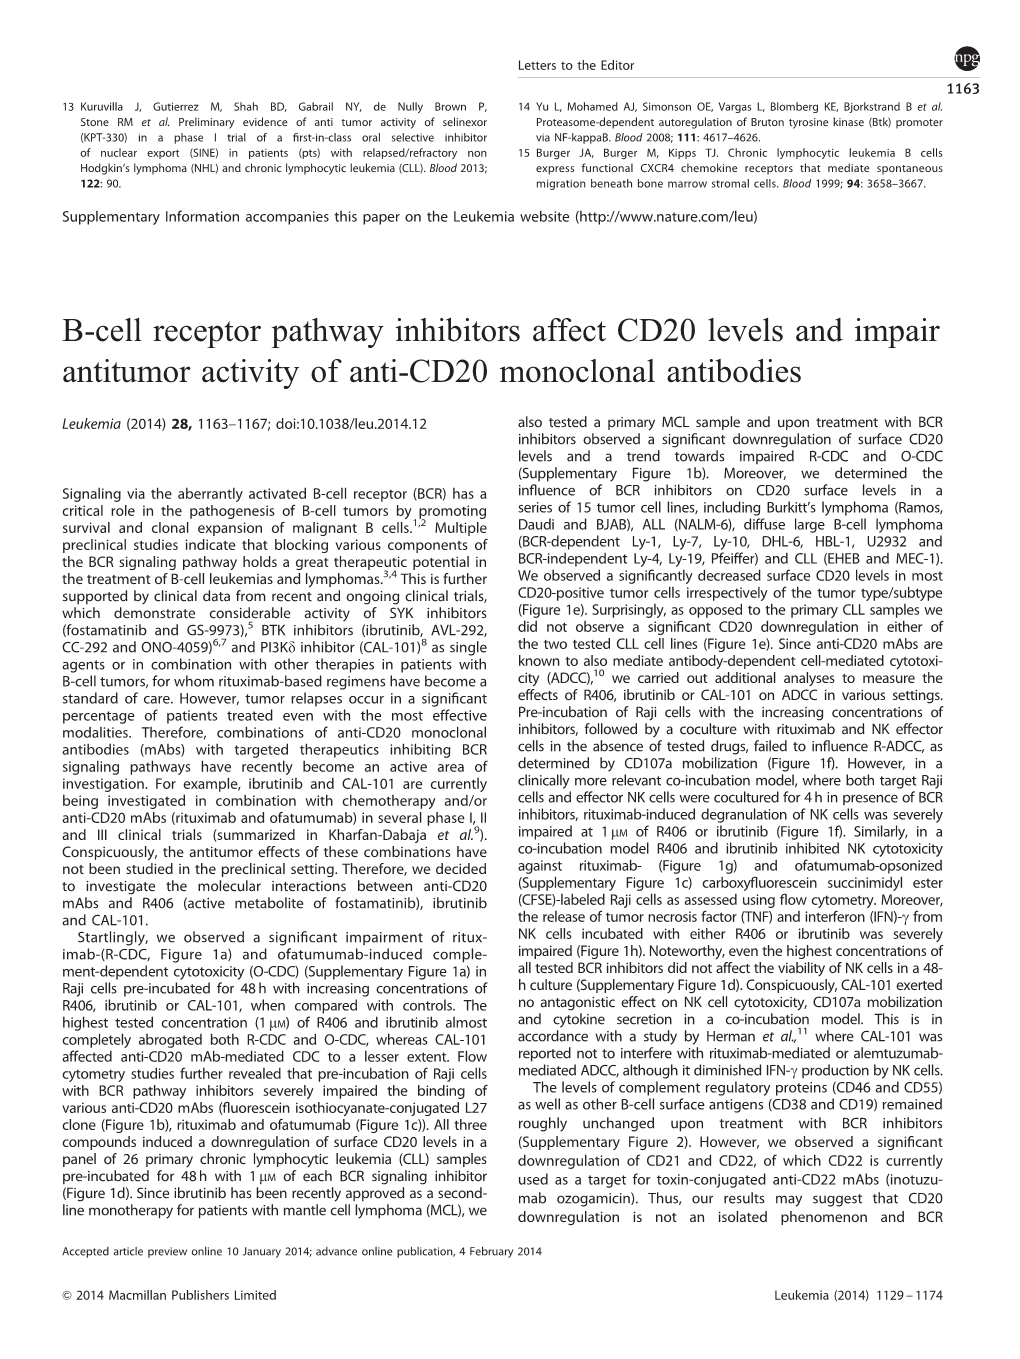 B-Cell Receptor Pathway Inhibitors Affect CD20 Levels and Impair Antitumor Activity of Anti-CD20 Monoclonal Antibodies